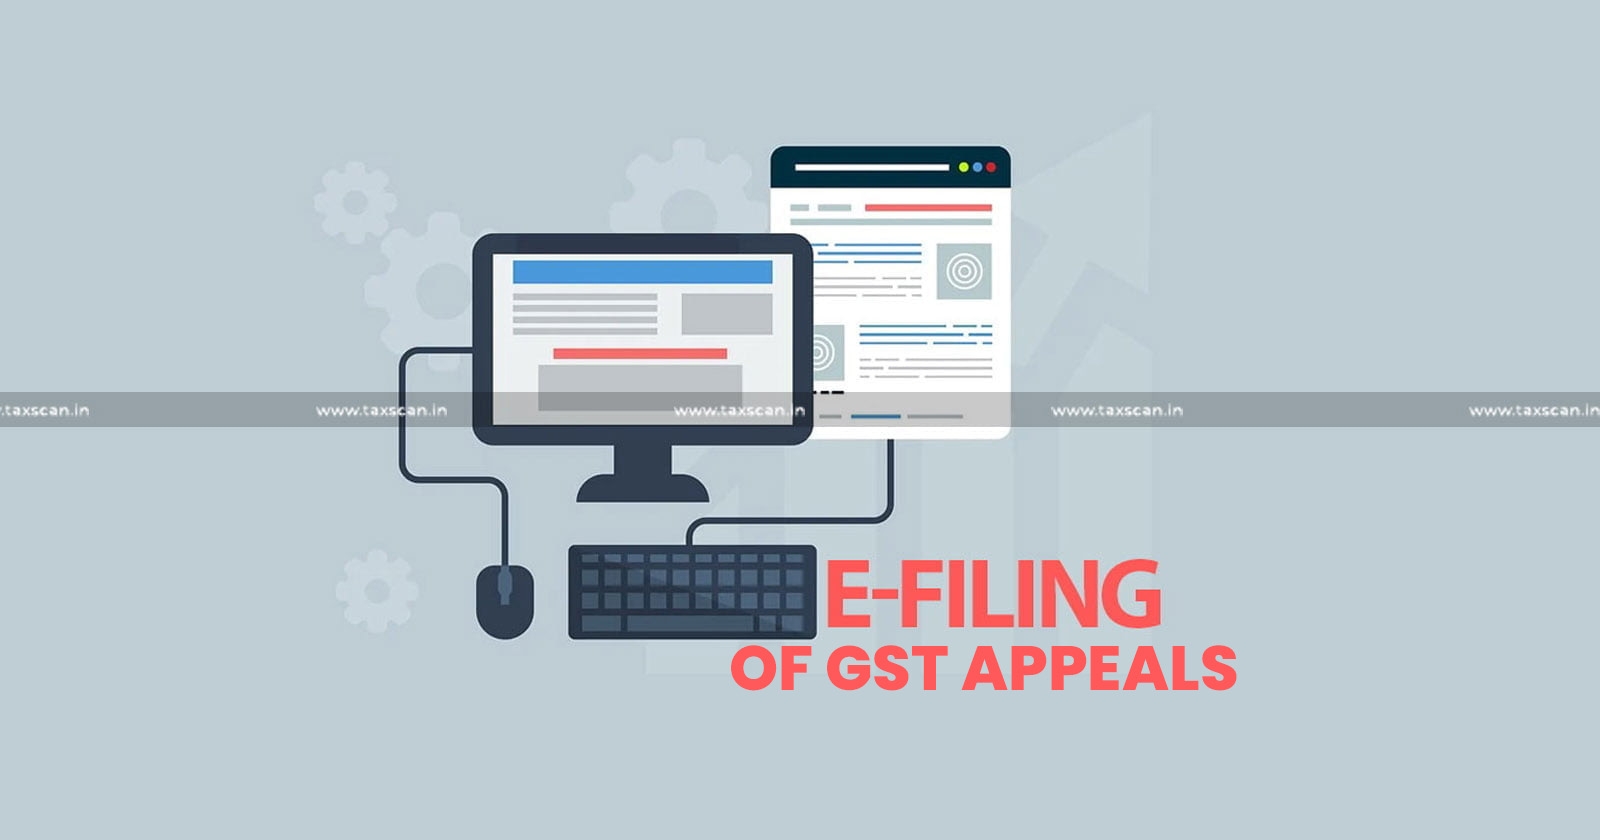 GST - Allahabad High Court - GST Appeals - GST appeals e filing - Self certified copy requirement - TAXSCAN